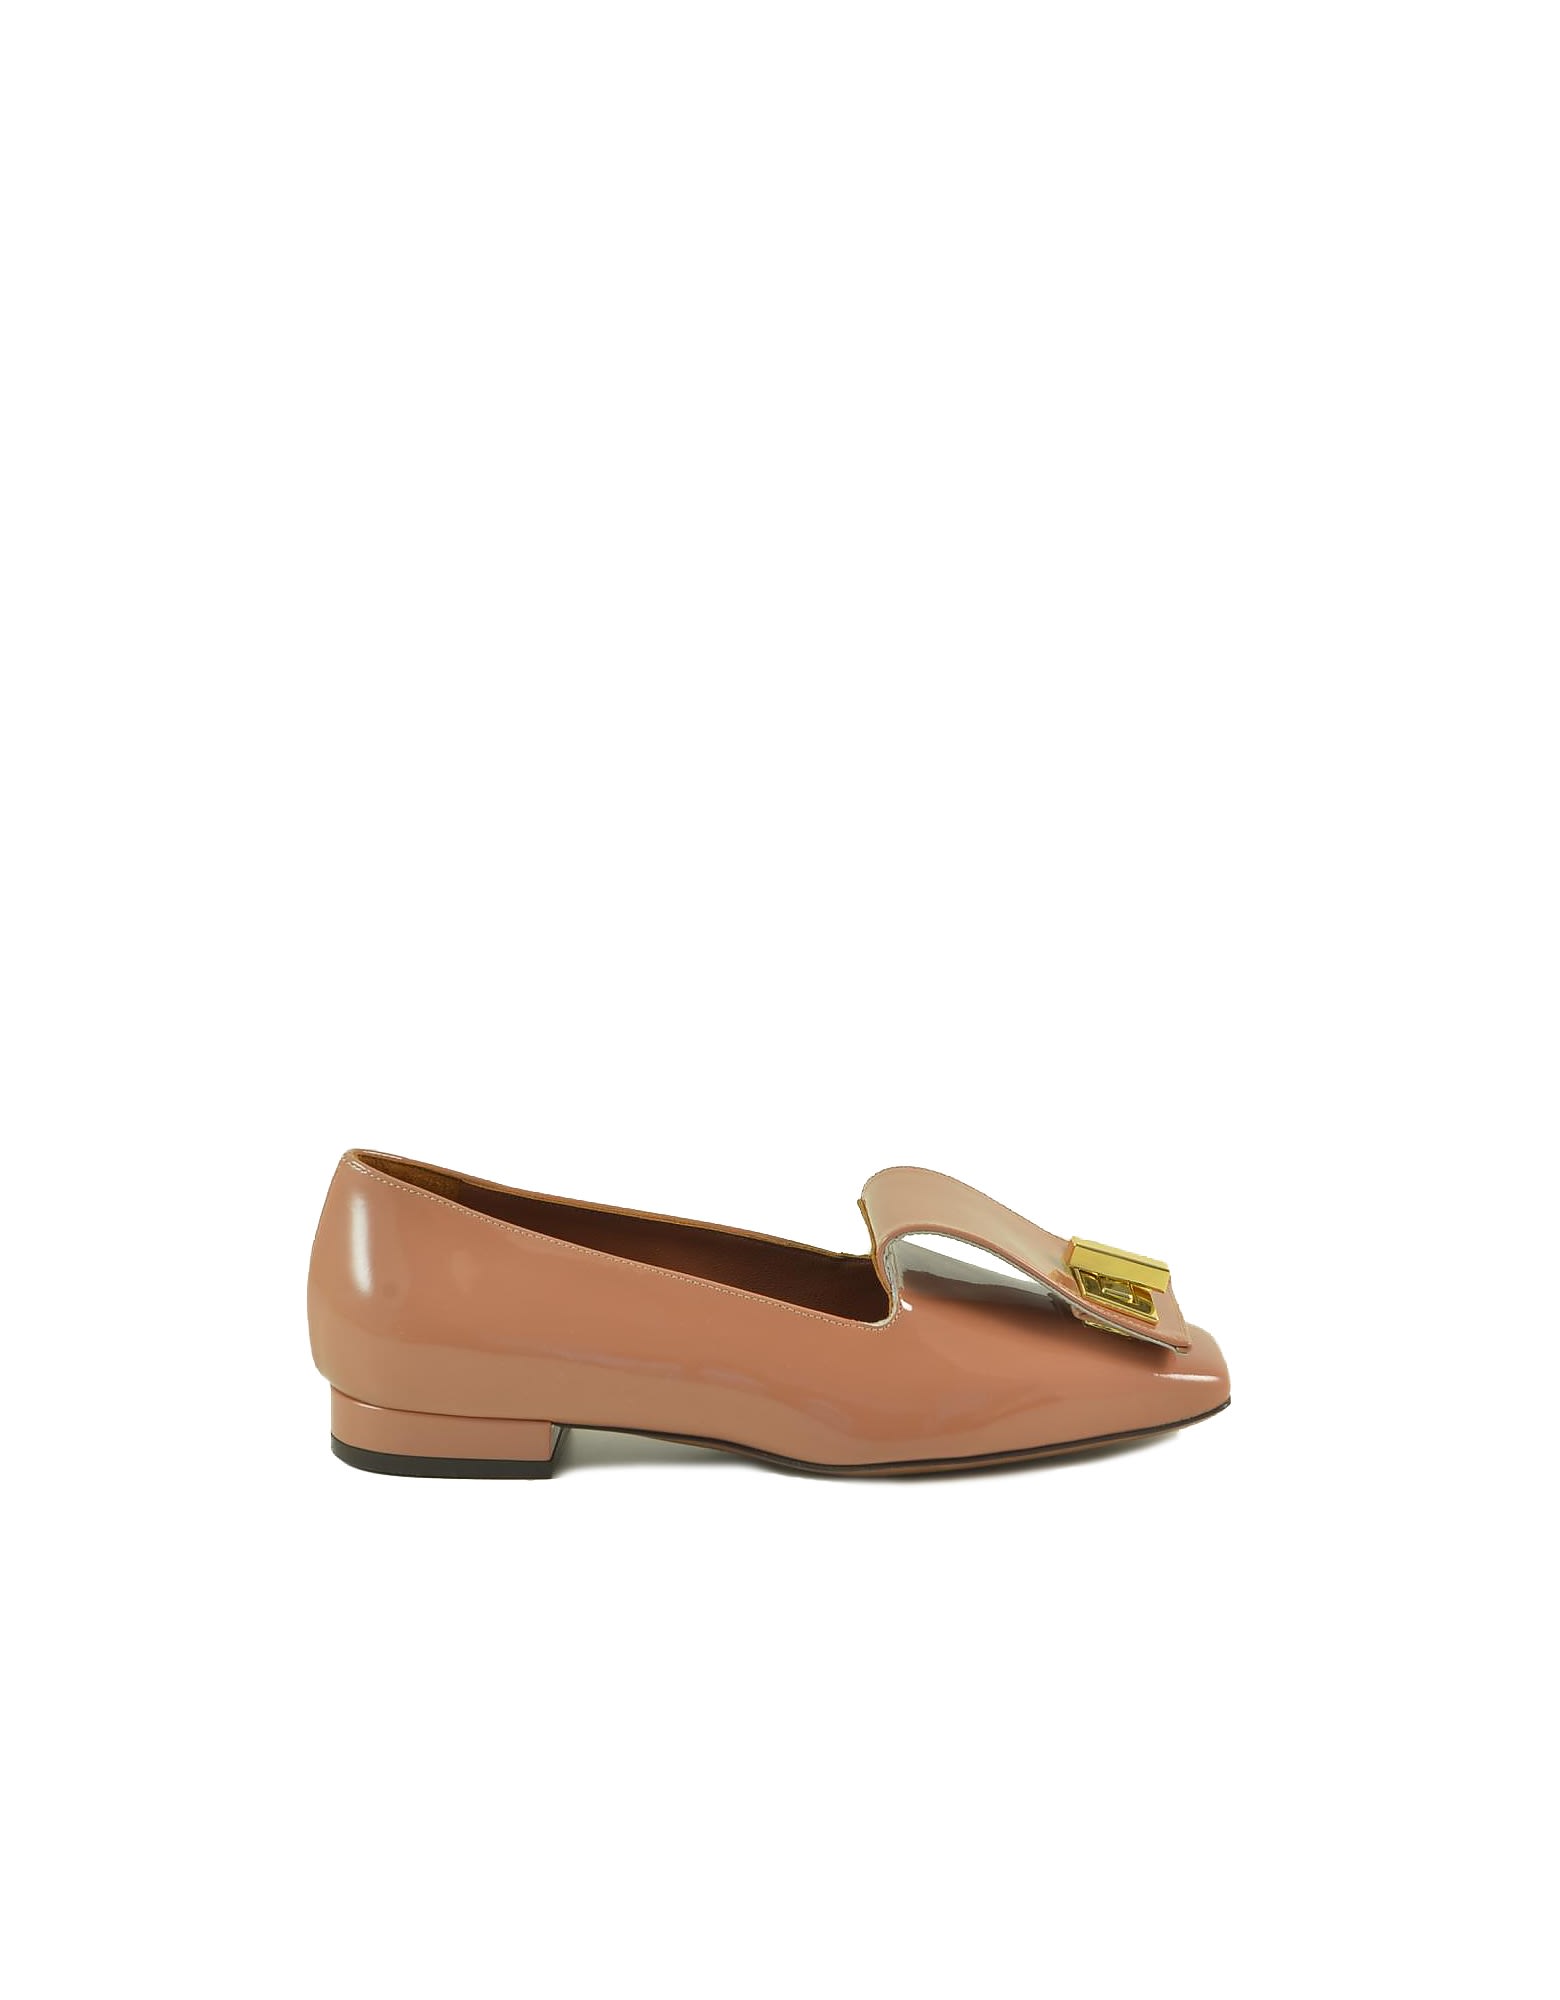 Lautre Chose Nude Patent Leather Loafer Shoes